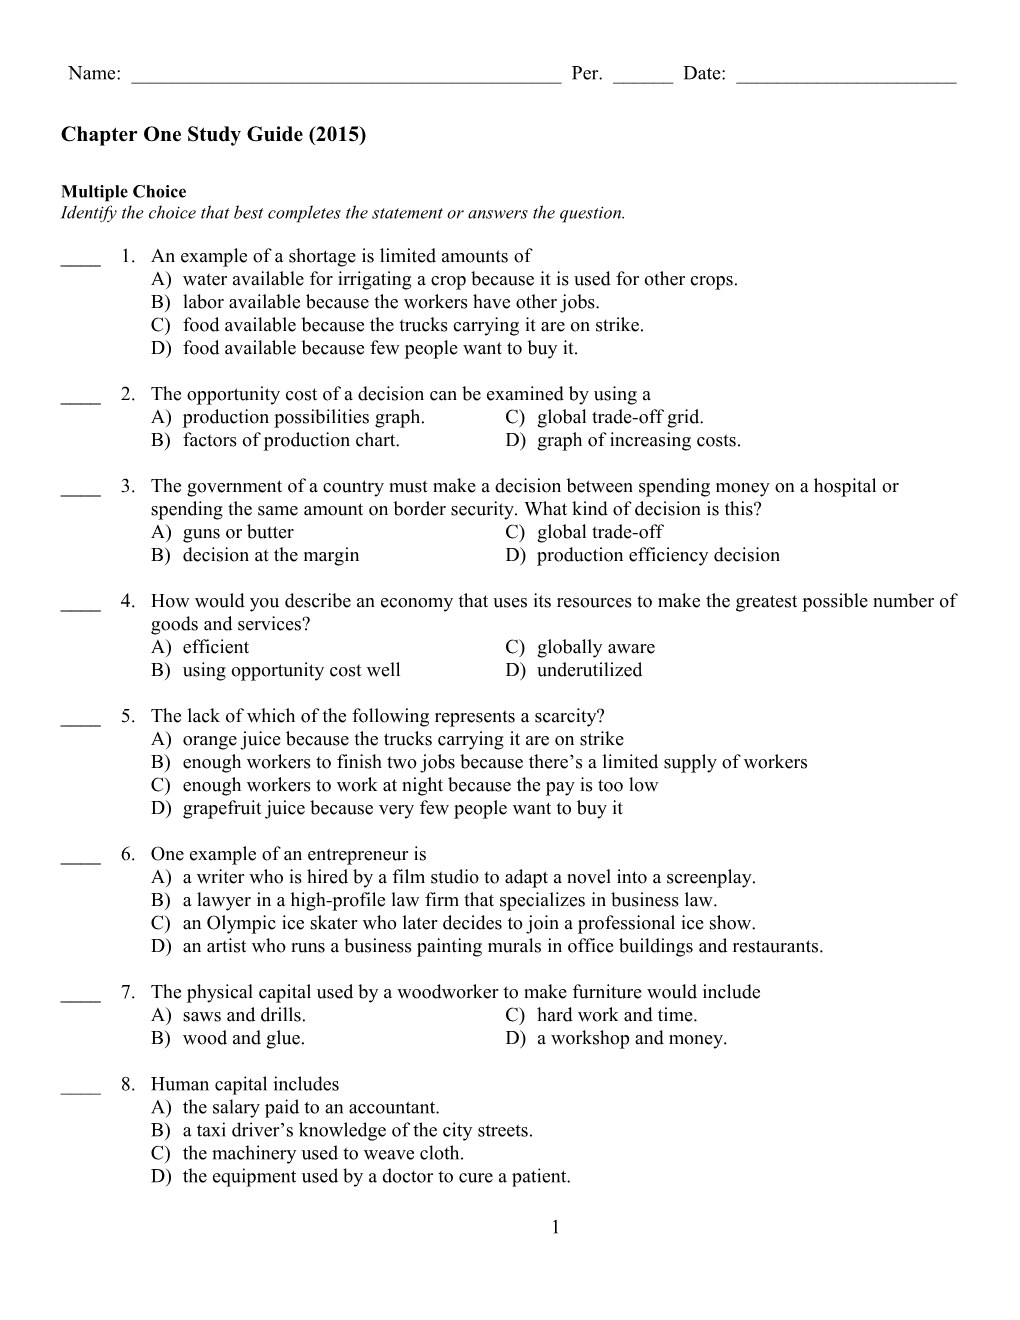 Chapter One Study Guide (2015)